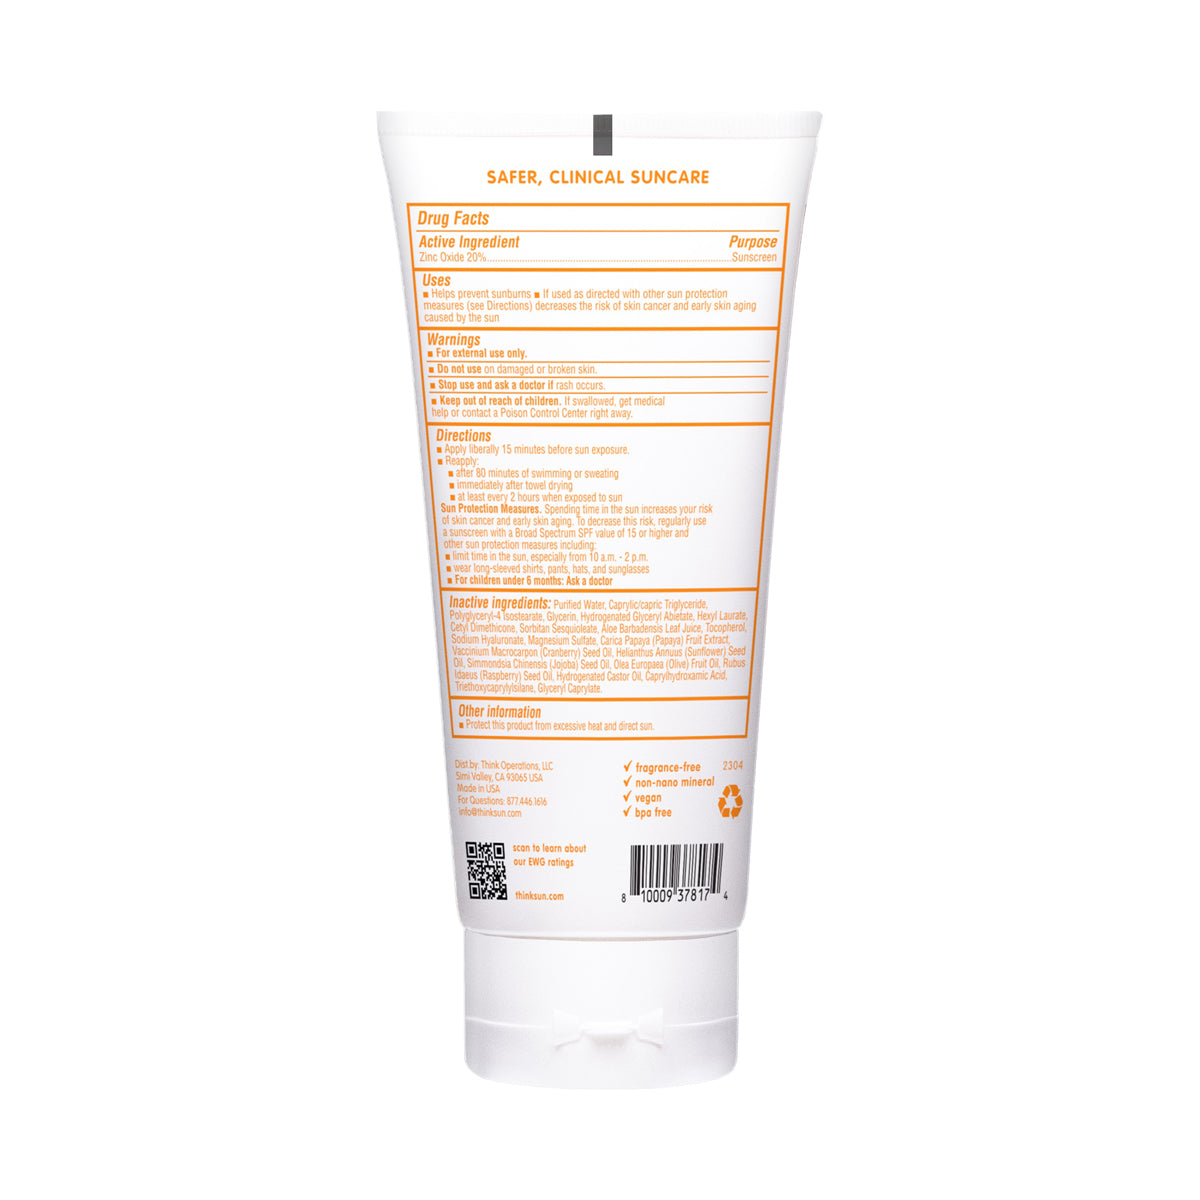 Back view of ThinkBaby Clear Zinc 30 SPF Sunscreen tube, displaying detailed product information, usage directions, and ingredients.